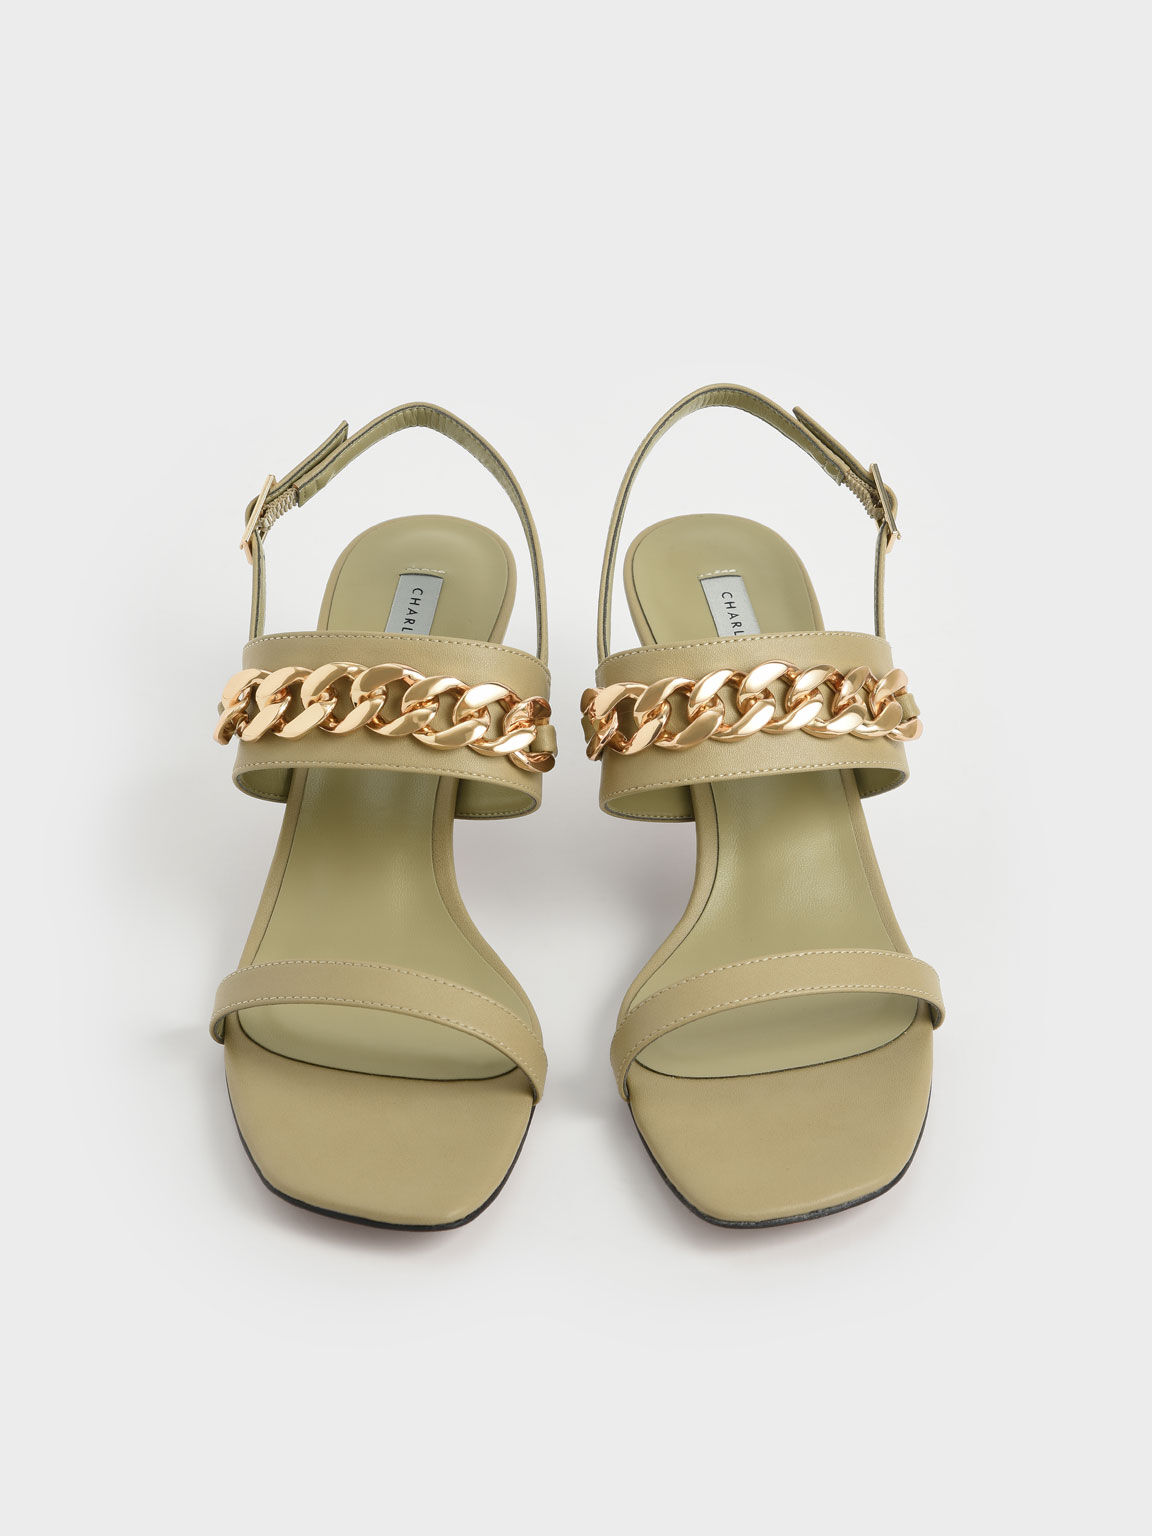 Chain Strap Heeled Sandals, Taupe, hi-res